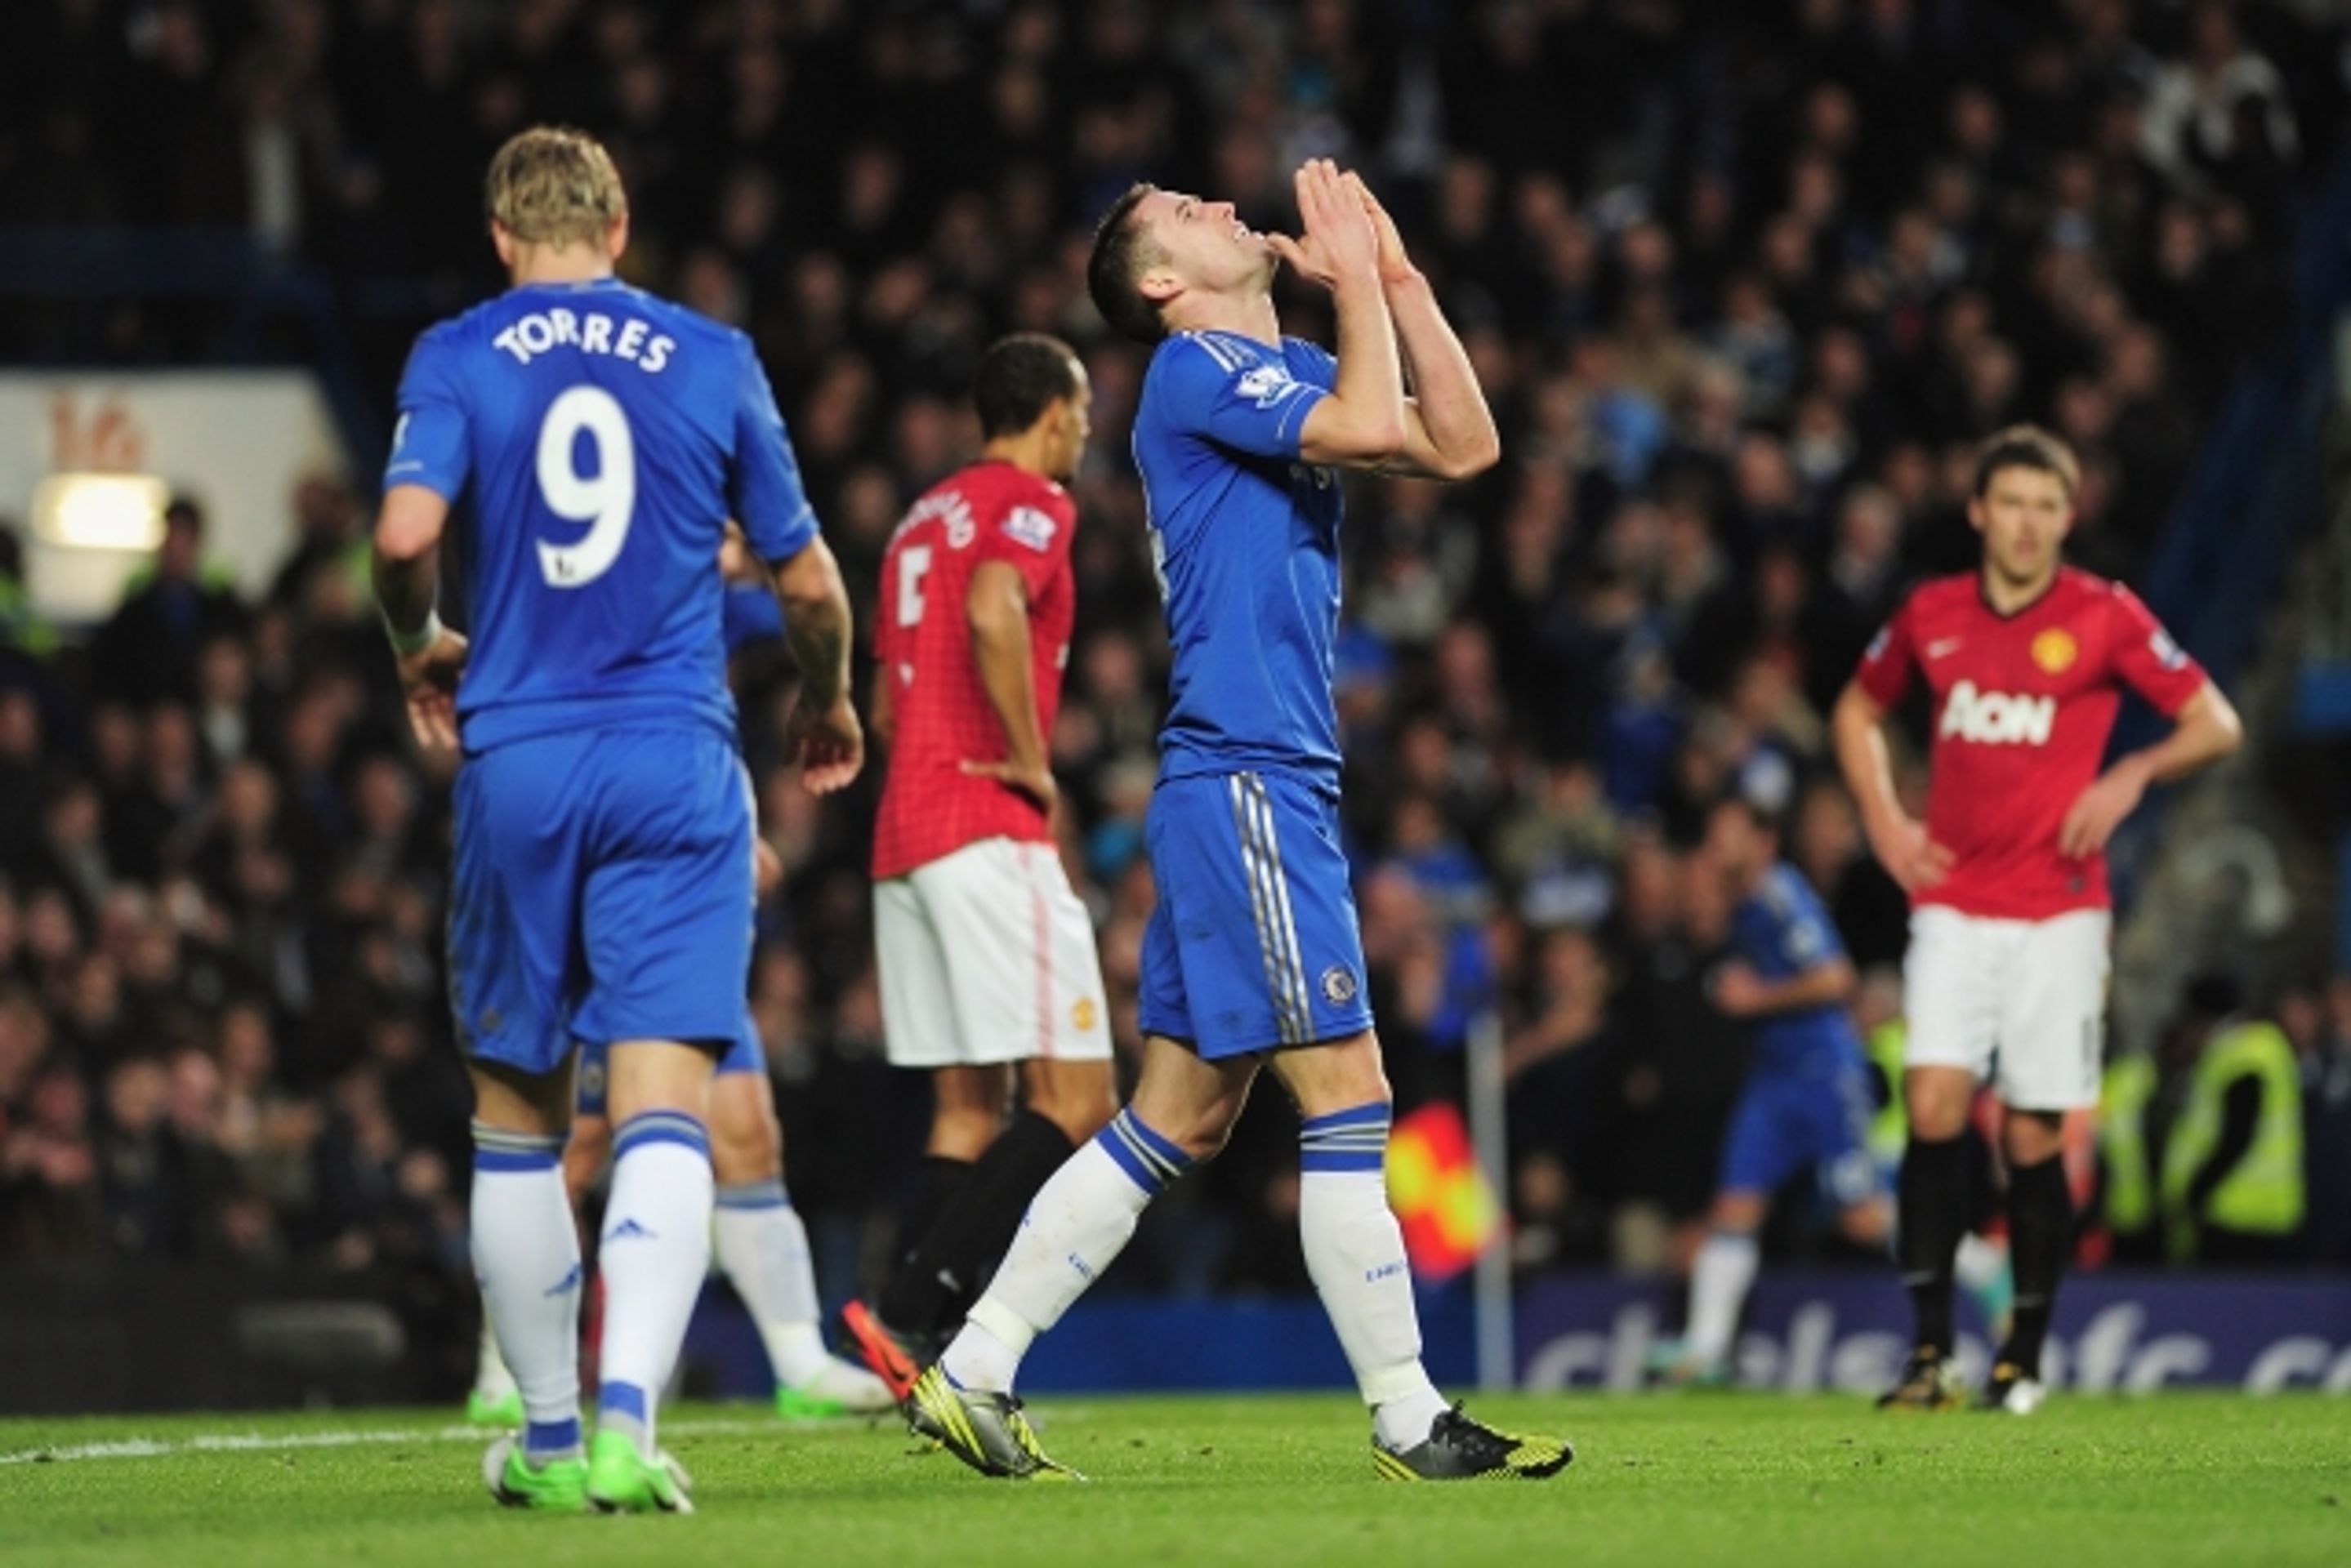 Chelsea - Manchester United 10 - GALERIE Chelsea - Manchester United 2:3 (10/13)